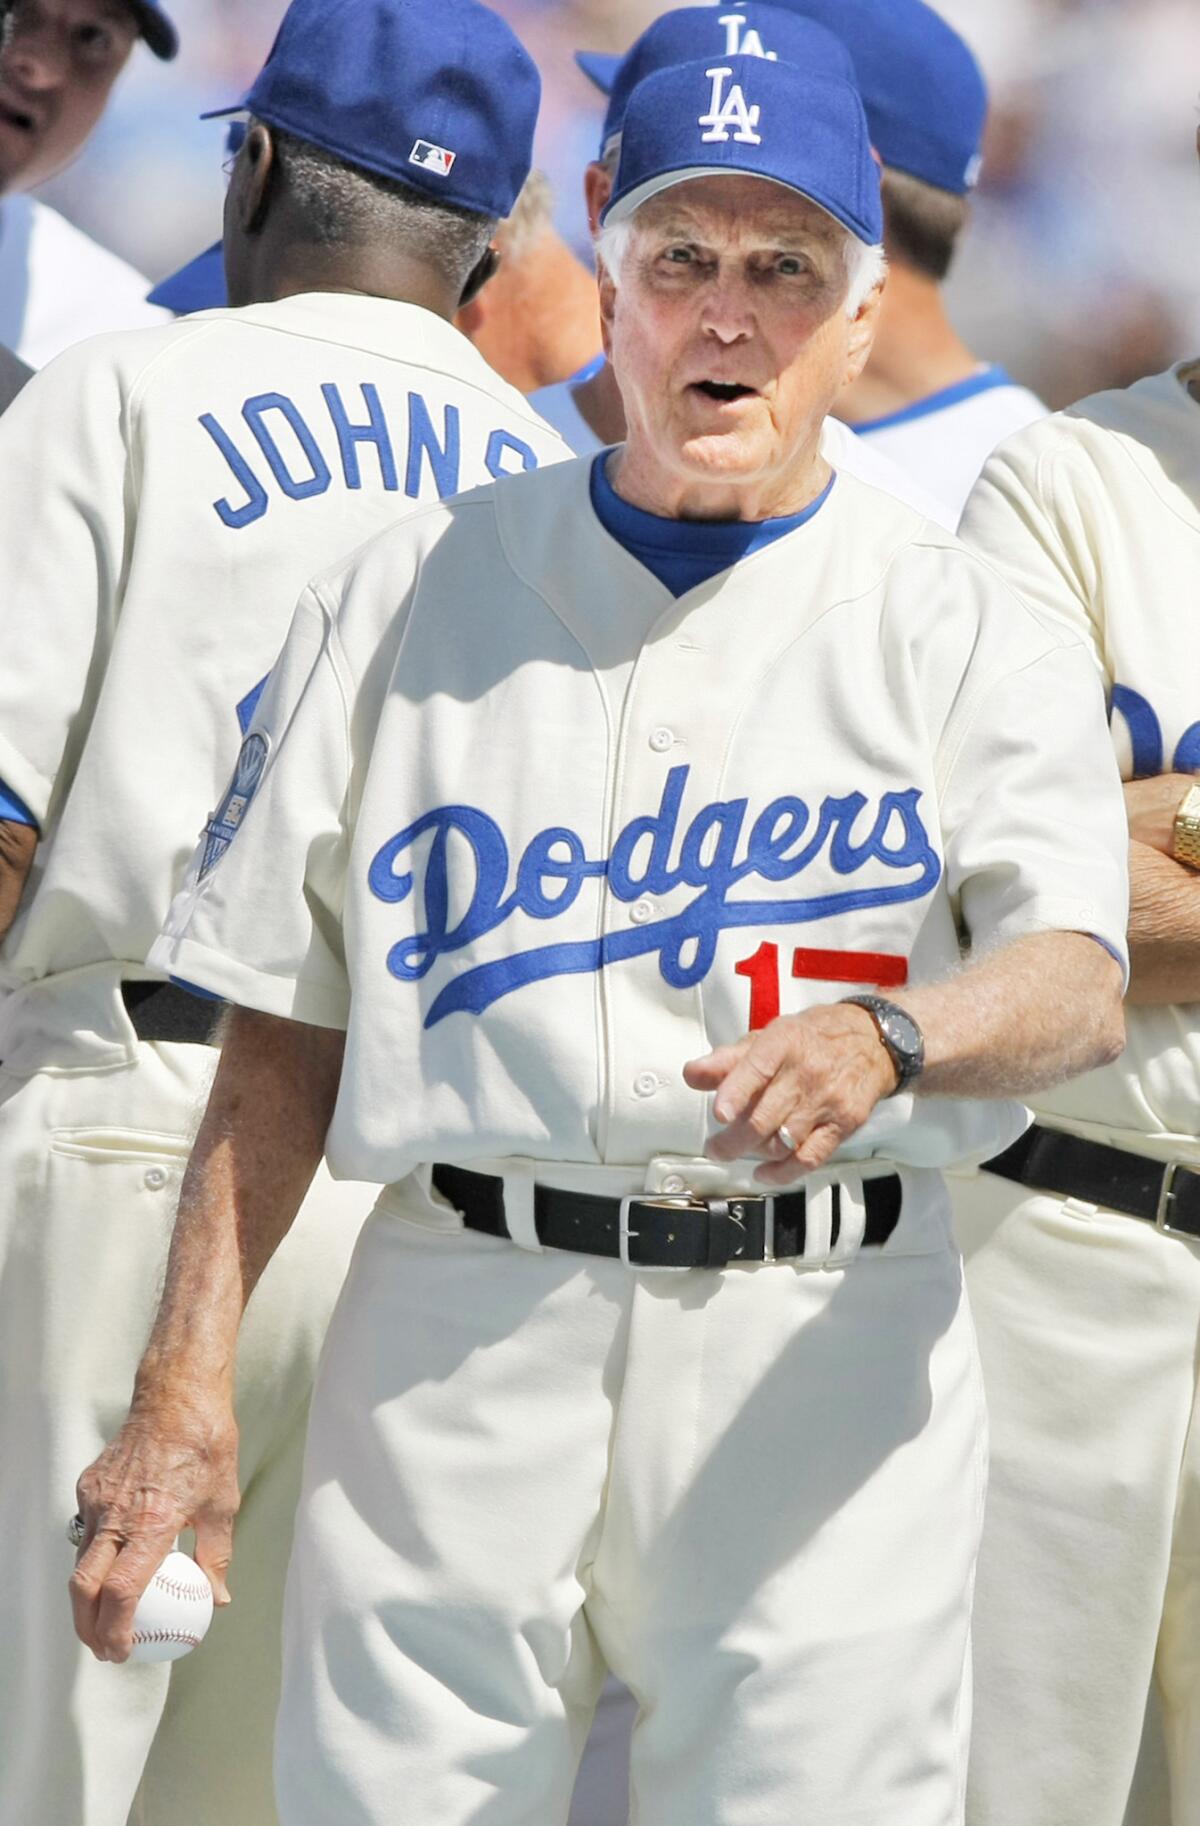 Carl Erskine pitched for the Brooklyn Dodgers and the Los Angeles Dodgers from 1948 to 1959 and still looked pretty good in a uniform at the Dodgers' celebration of the 50th anniversary of their move to L.A. in 2008.